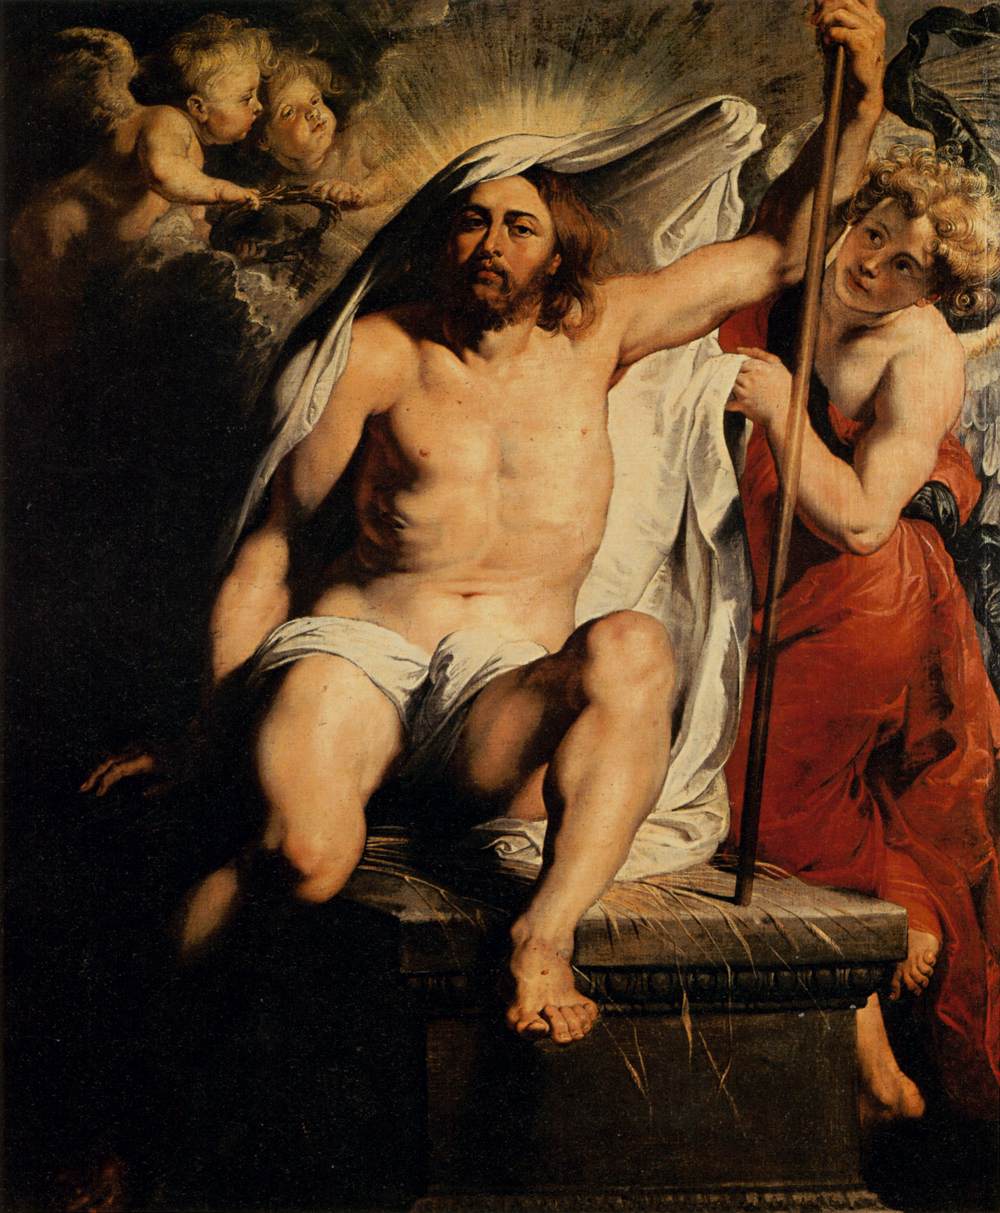 Christ Resurrected by Peter Paul Rubens Reproduction Oil Painting on Canvas